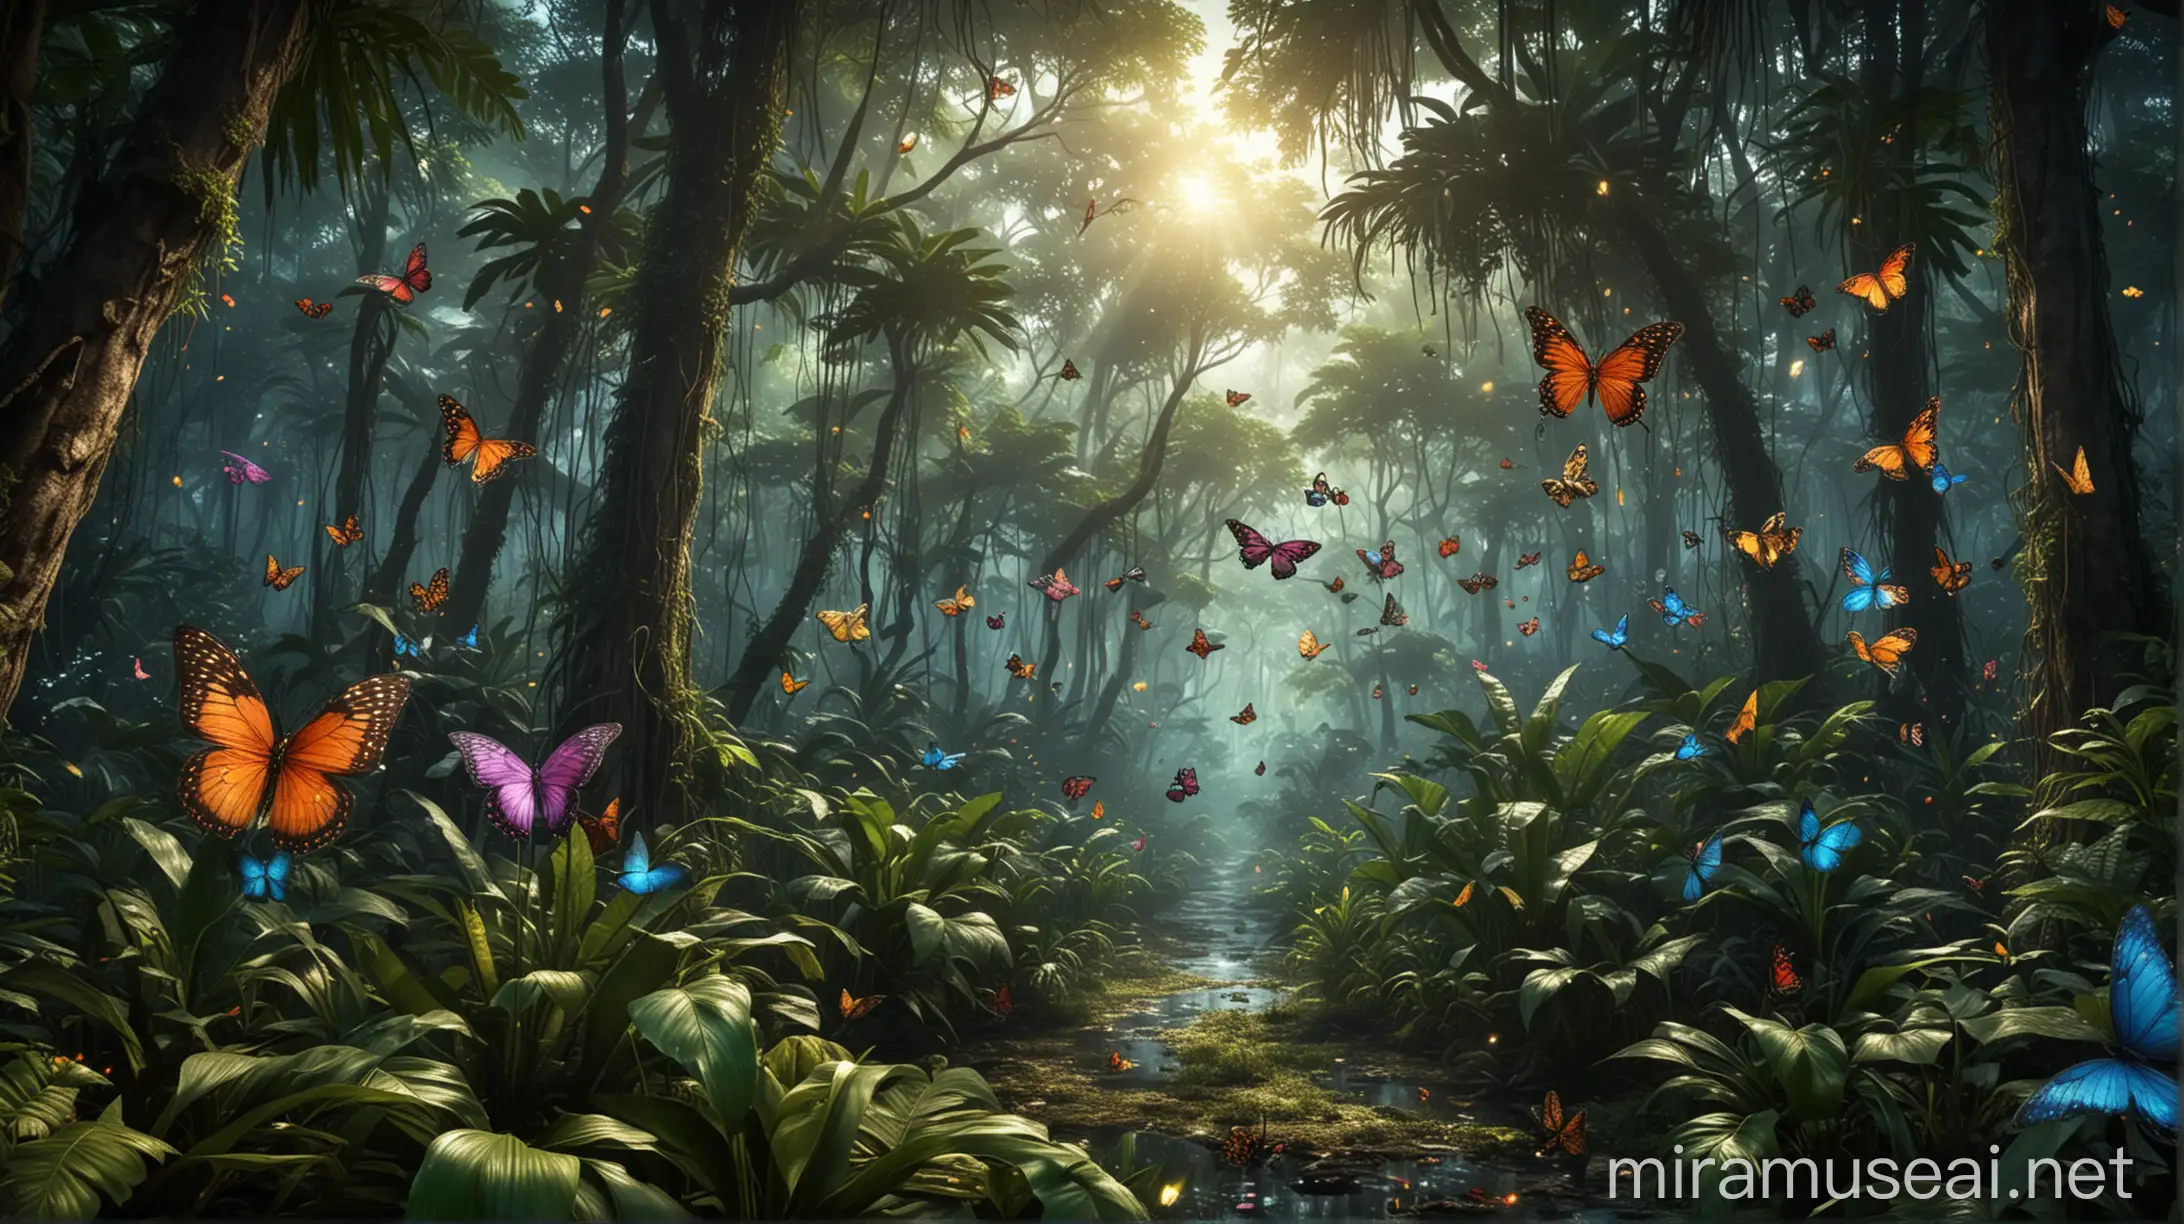 Enchanted Forest Alive with Butterflies and Fireflies